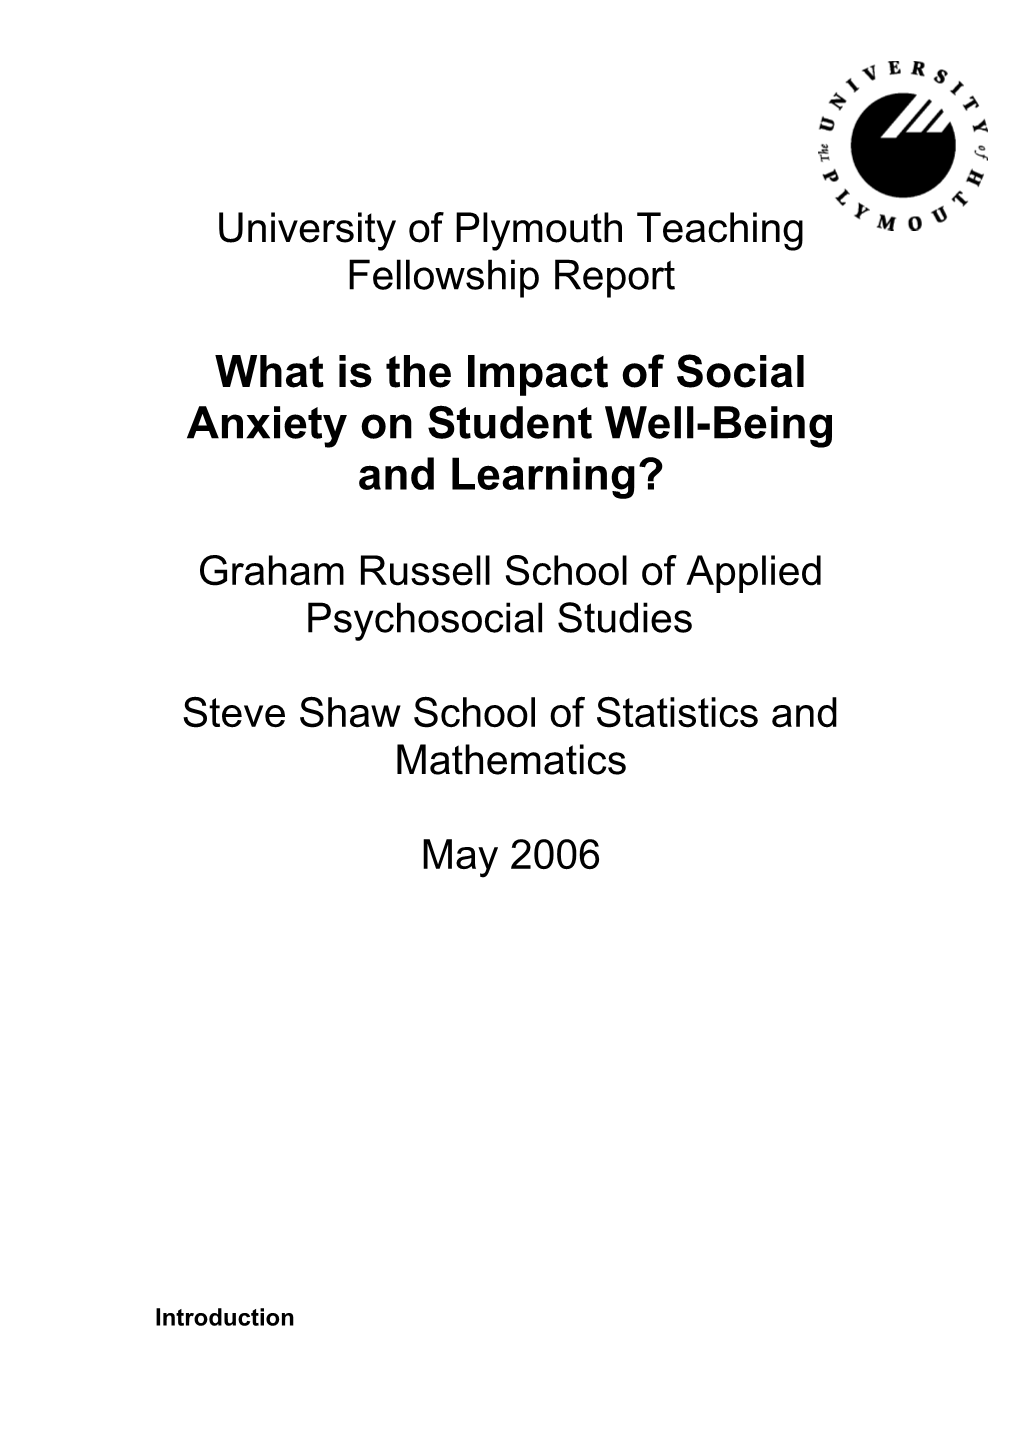 Russell and Shaw (2006) Social Anxiety Teaching Fellowship Report